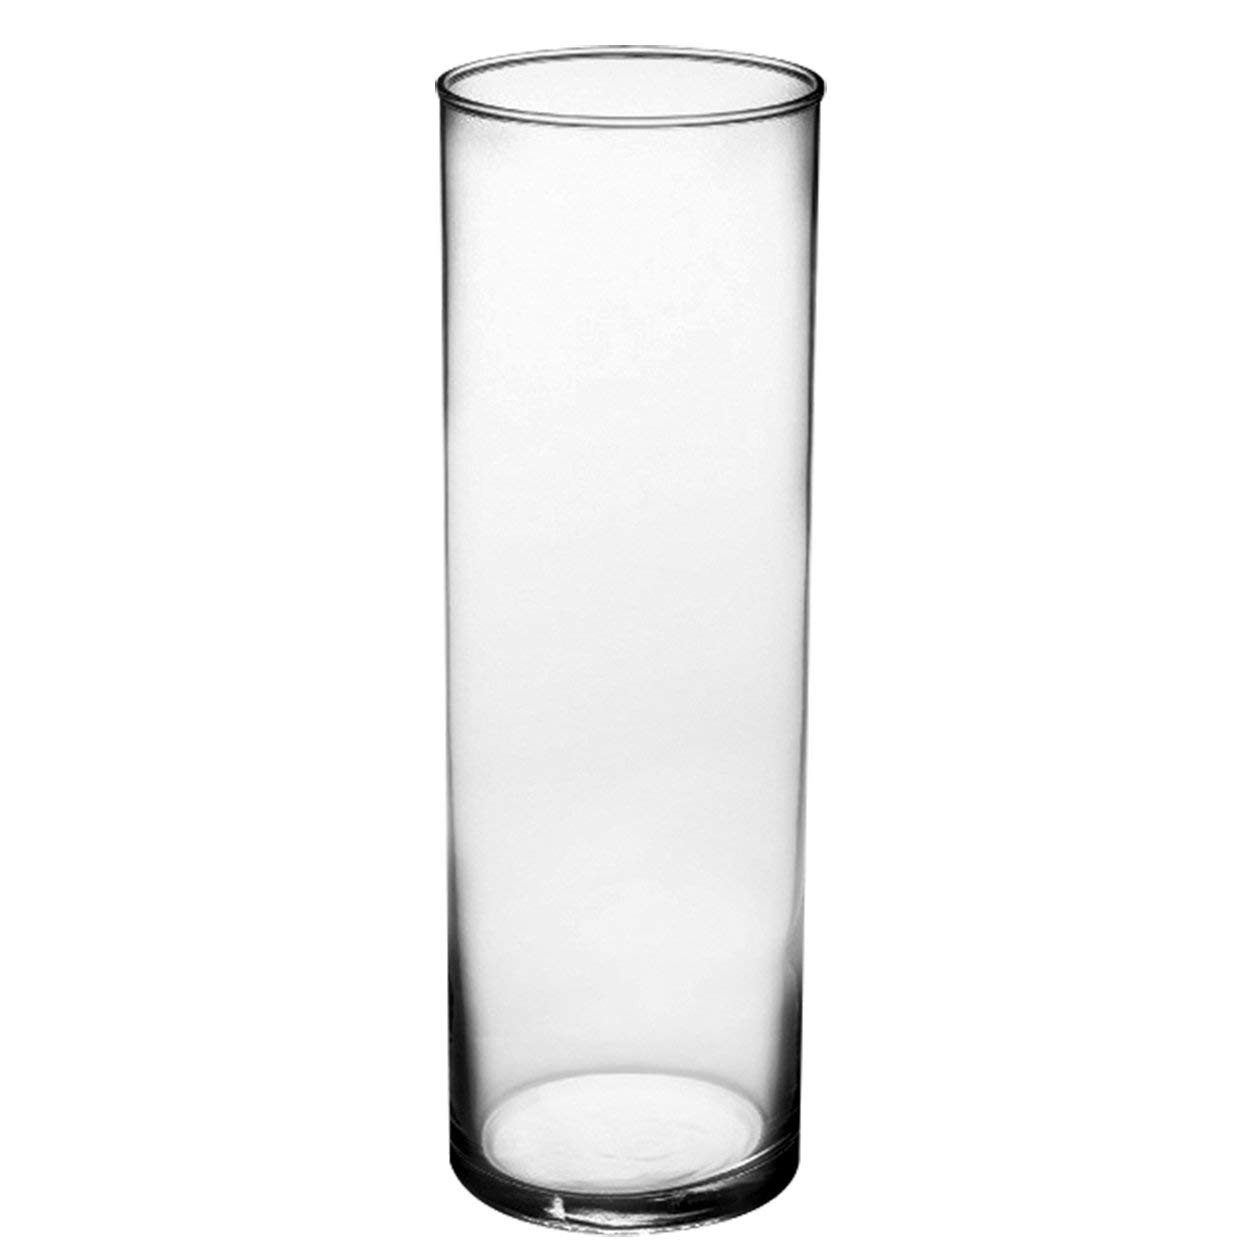 15 Unique Tall White Vases Sale 2024 free download tall white vases sale of amazon com syndicate sales 3 1 2 x 10 1 2 cylinder vase clear inside amazon com syndicate sales 3 1 2 x 10 1 2 cylinder vase clear planters garden outdoor